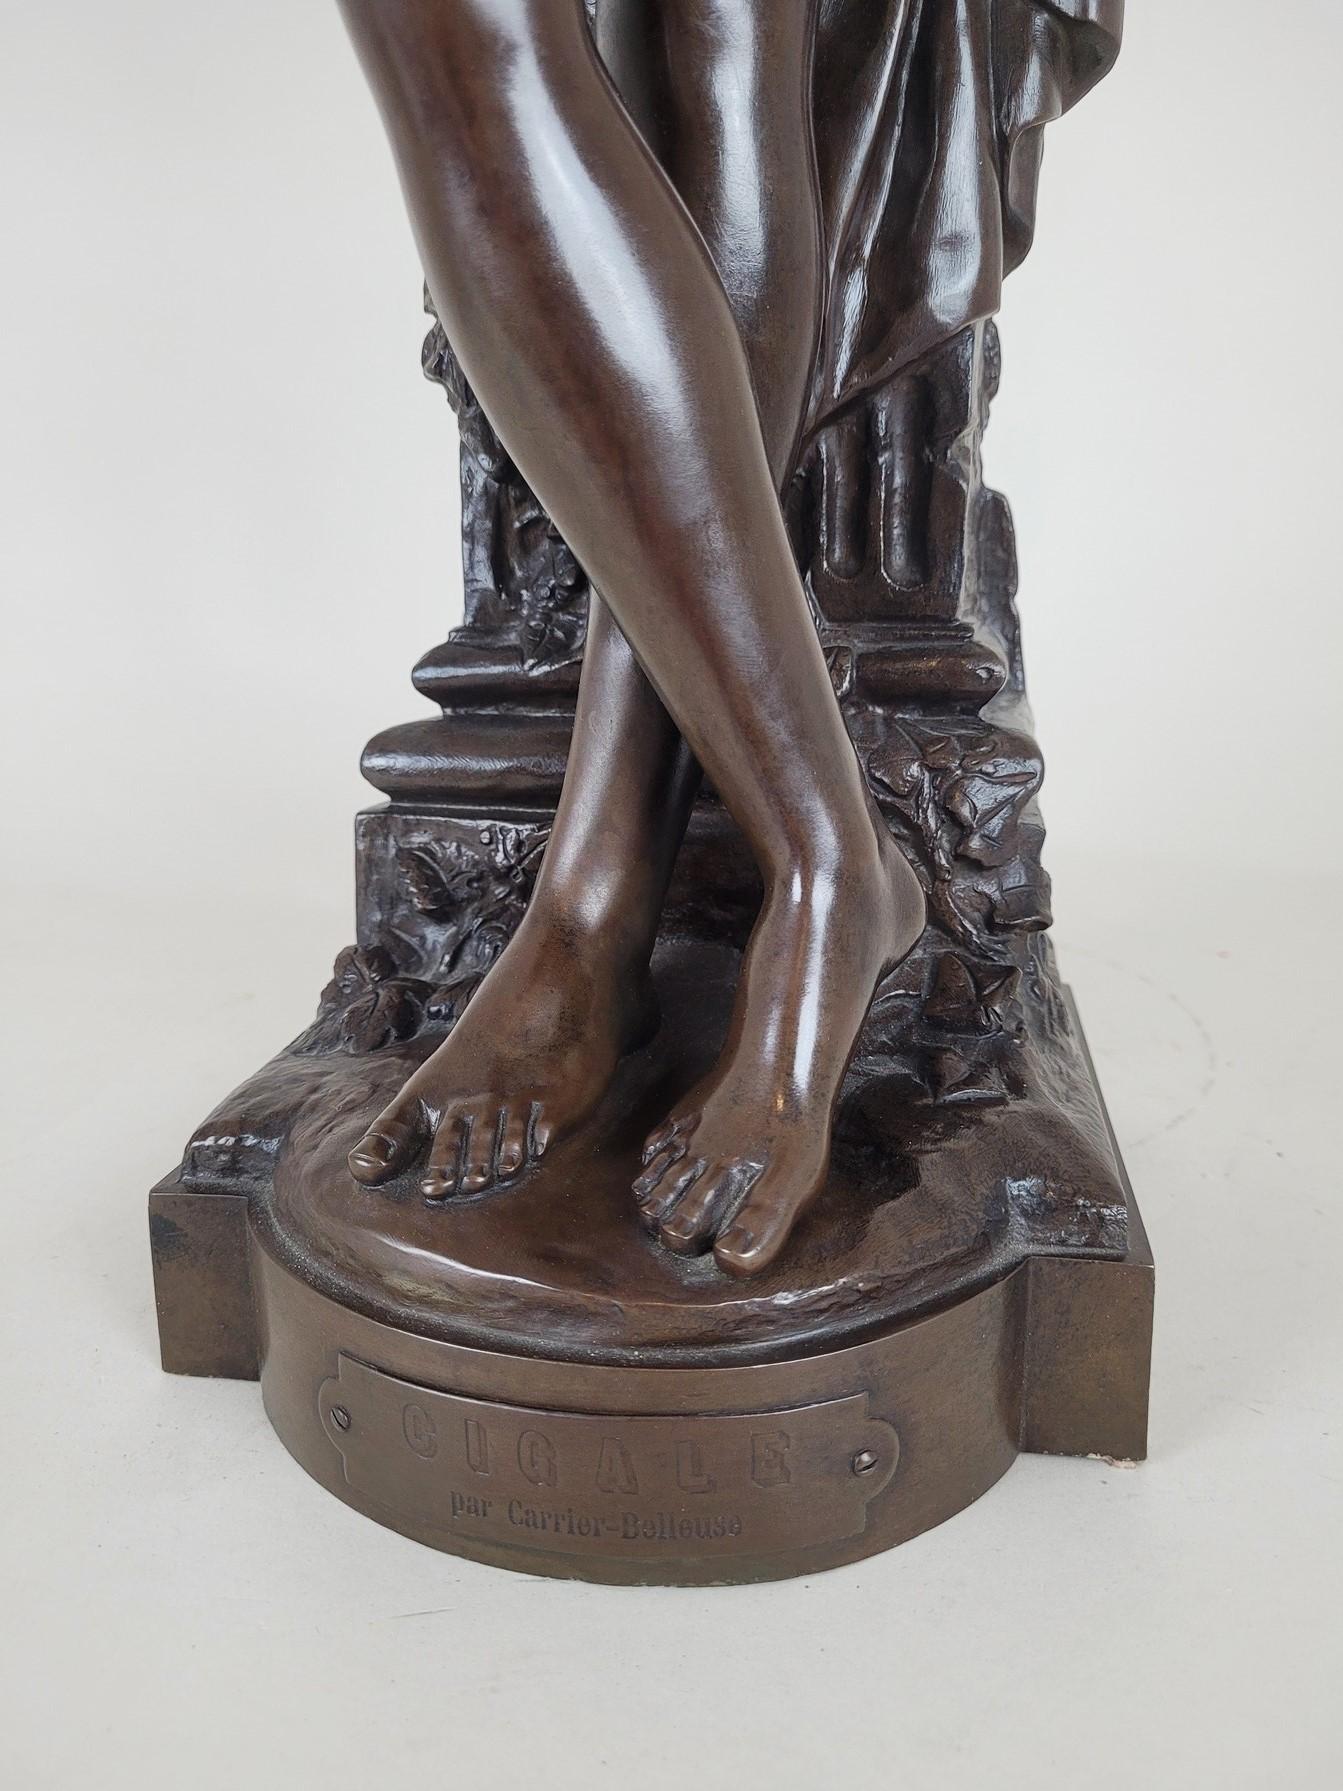 Napoleon III Carrier-belleuse, Cigale, Large Signed Bronze, 19th Century For Sale